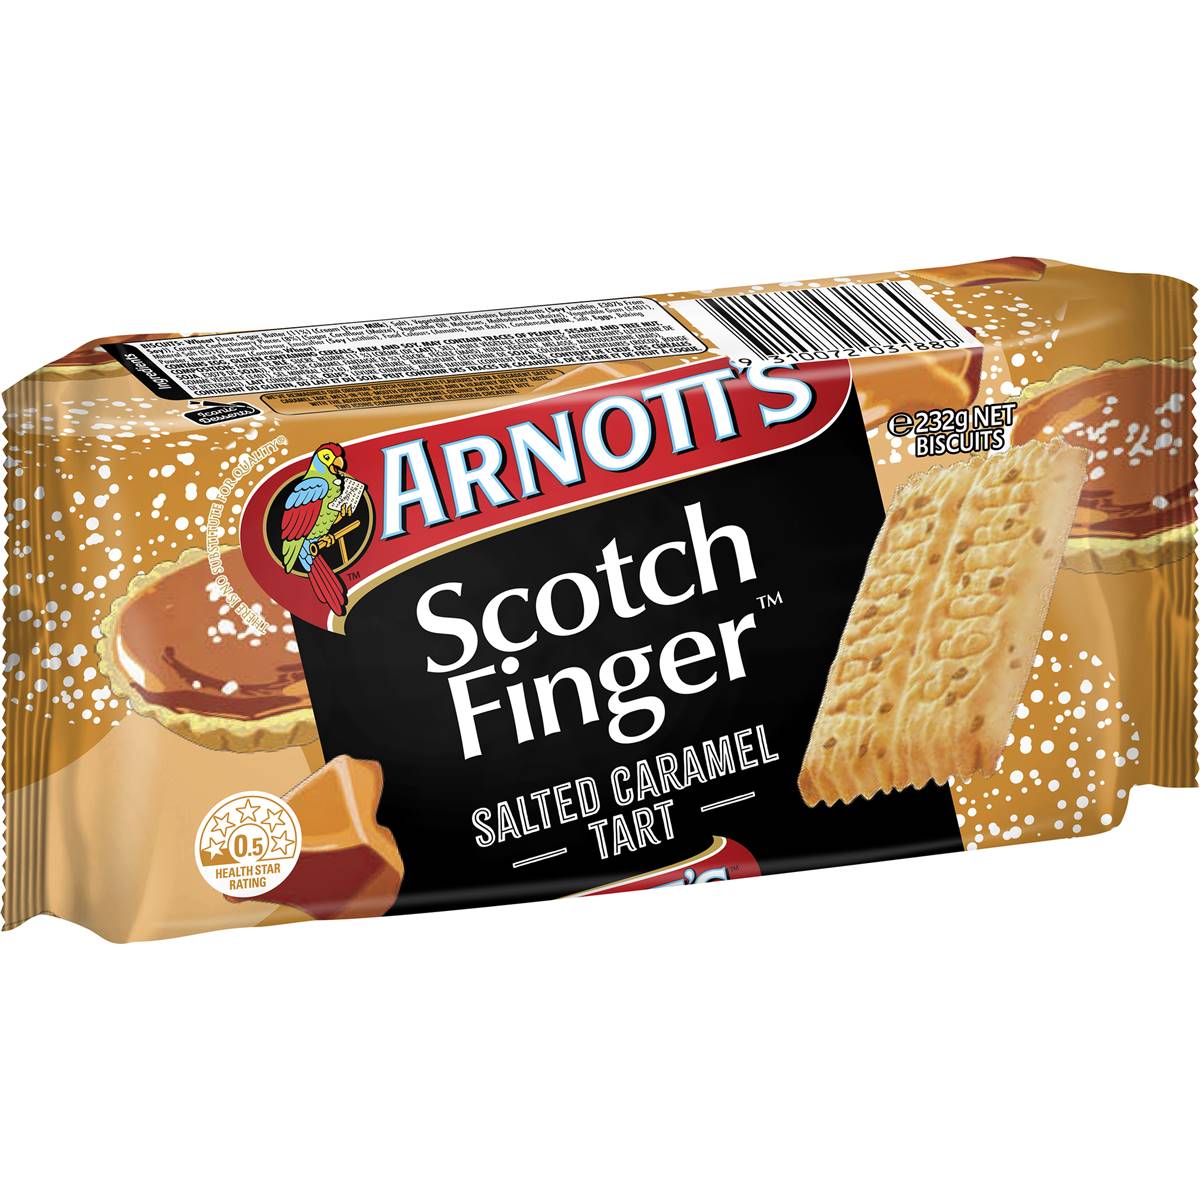 Calories In Arnotts Scotch Finger Salted Caramel Biscuits Calcount 8441